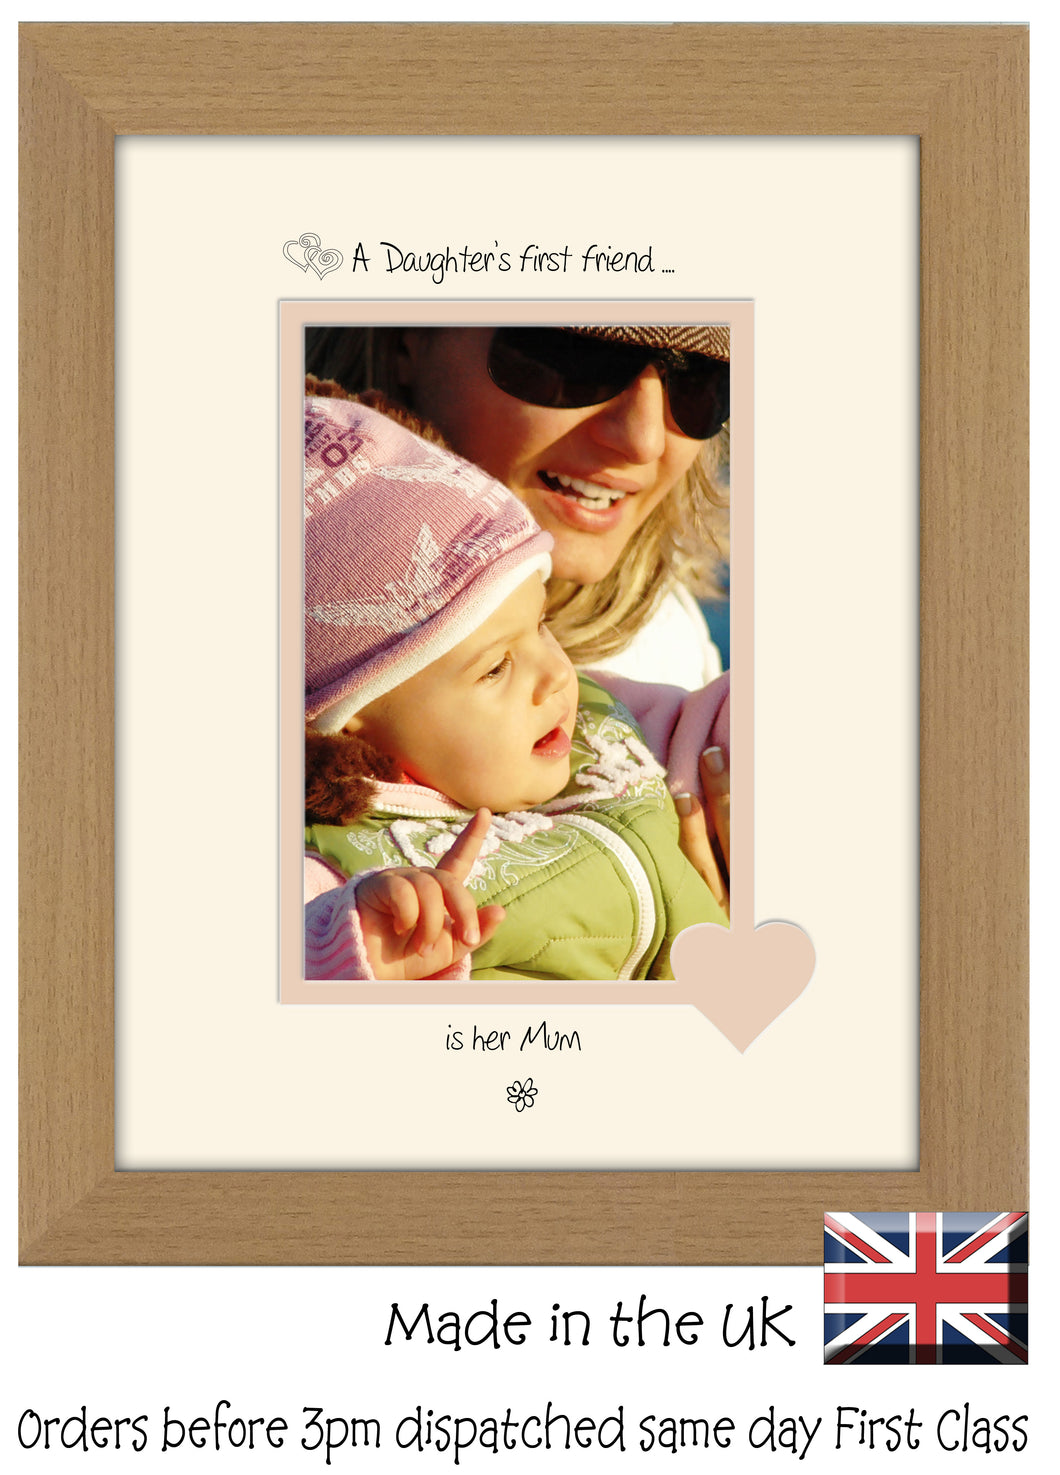 Mum Photo Frame - A Daughters first friend…  is her Mum Portrait photo frame 6